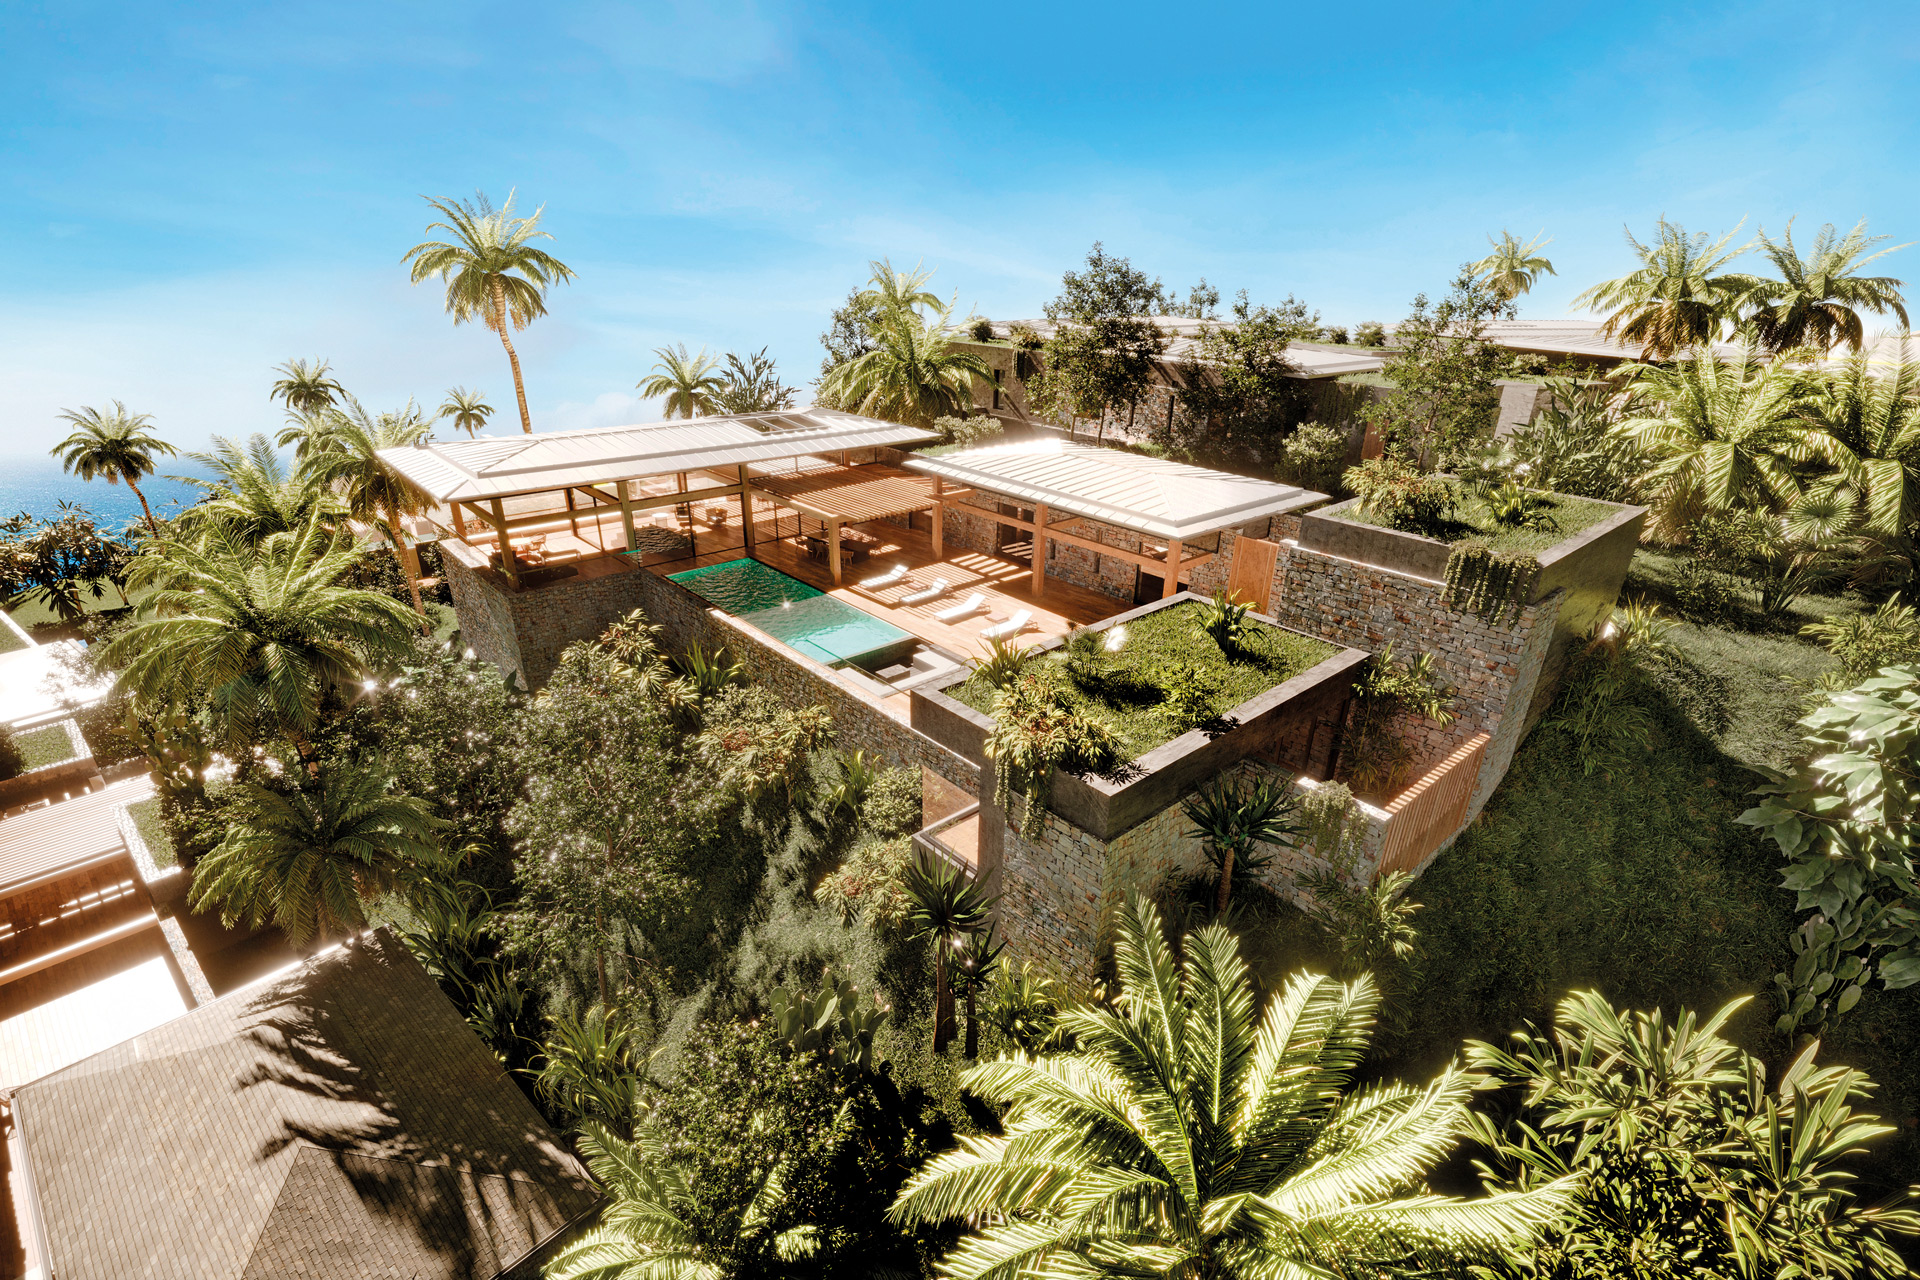 Villa on hilltop with palm trees and pool